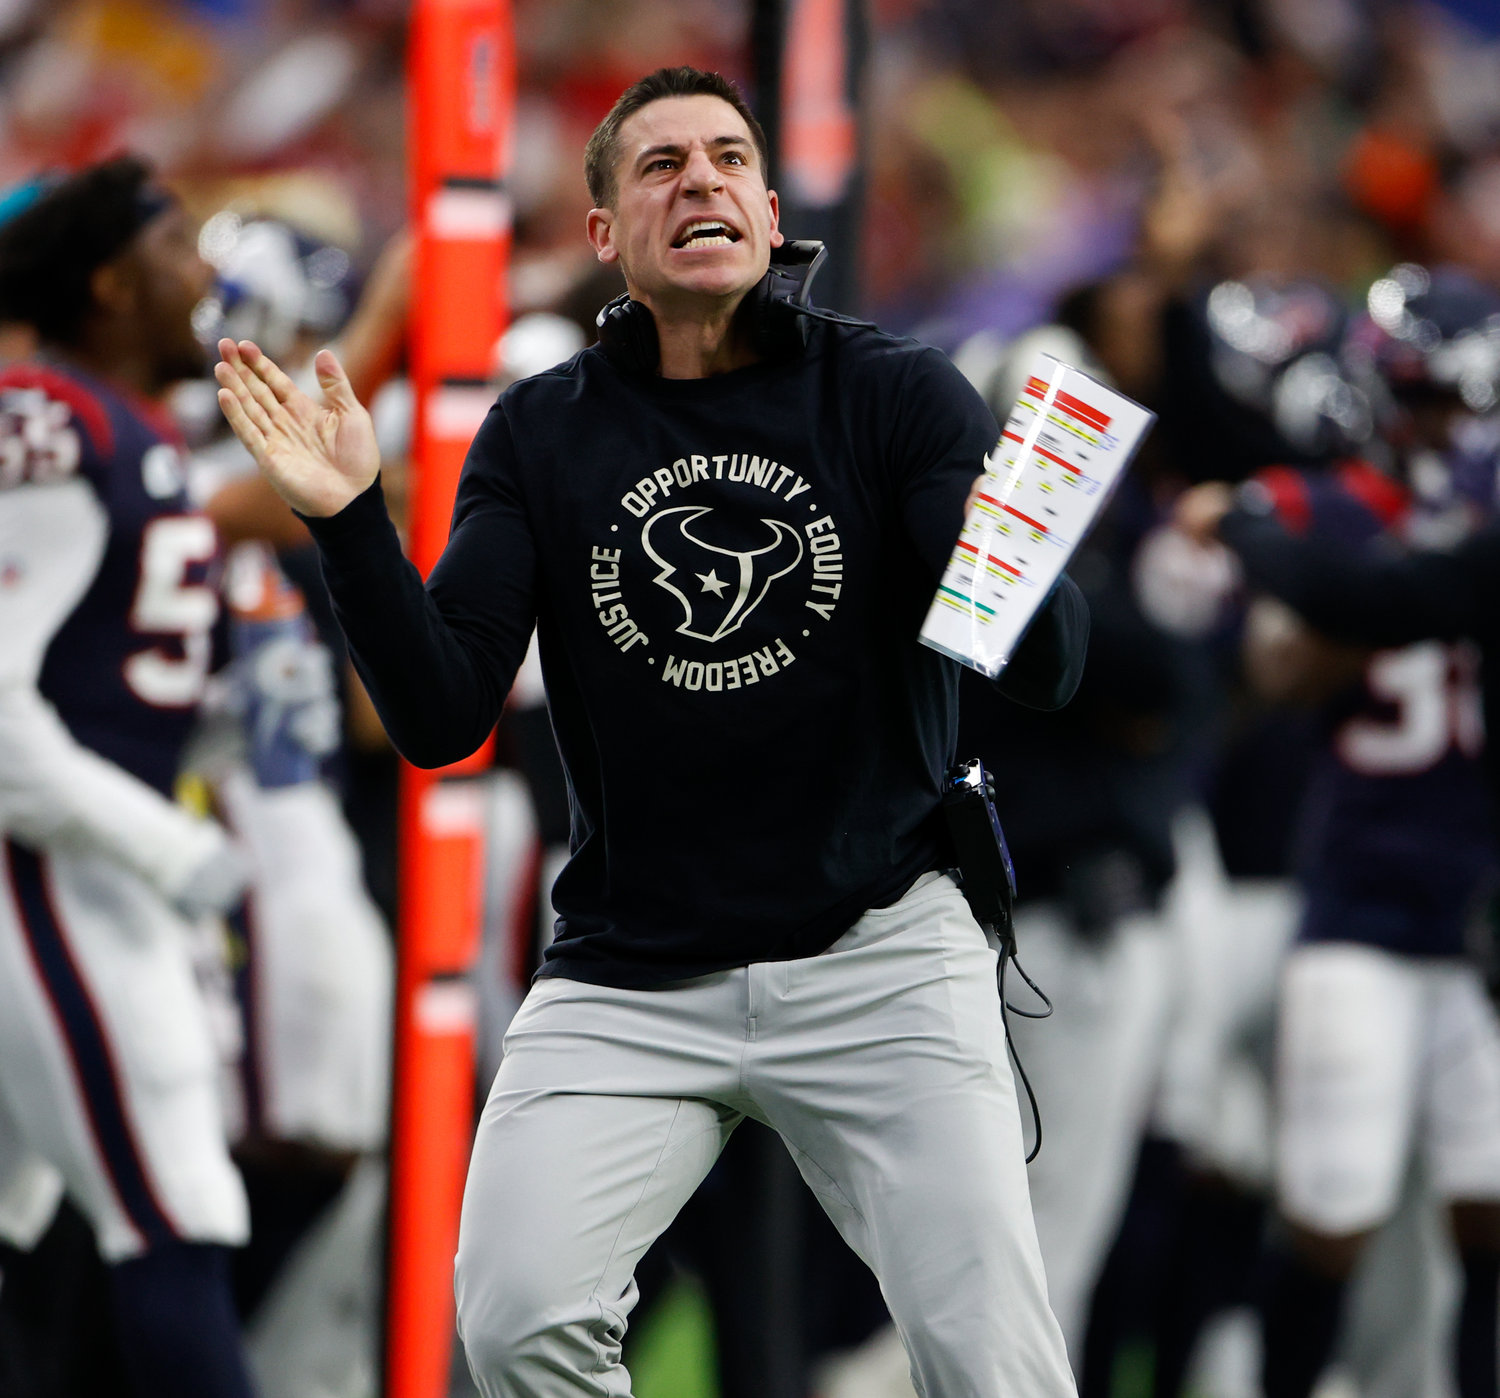 Houston Texans special teams coordinator Frank Ross celebrates after the Kansas City Chiefs missed a potential game-winning field goal near the end of regulation in an NFL game between the Texans and the Chiefs on Dec. 18, 2022, in Houston. The Chiefs won, 30-24, in overtime.